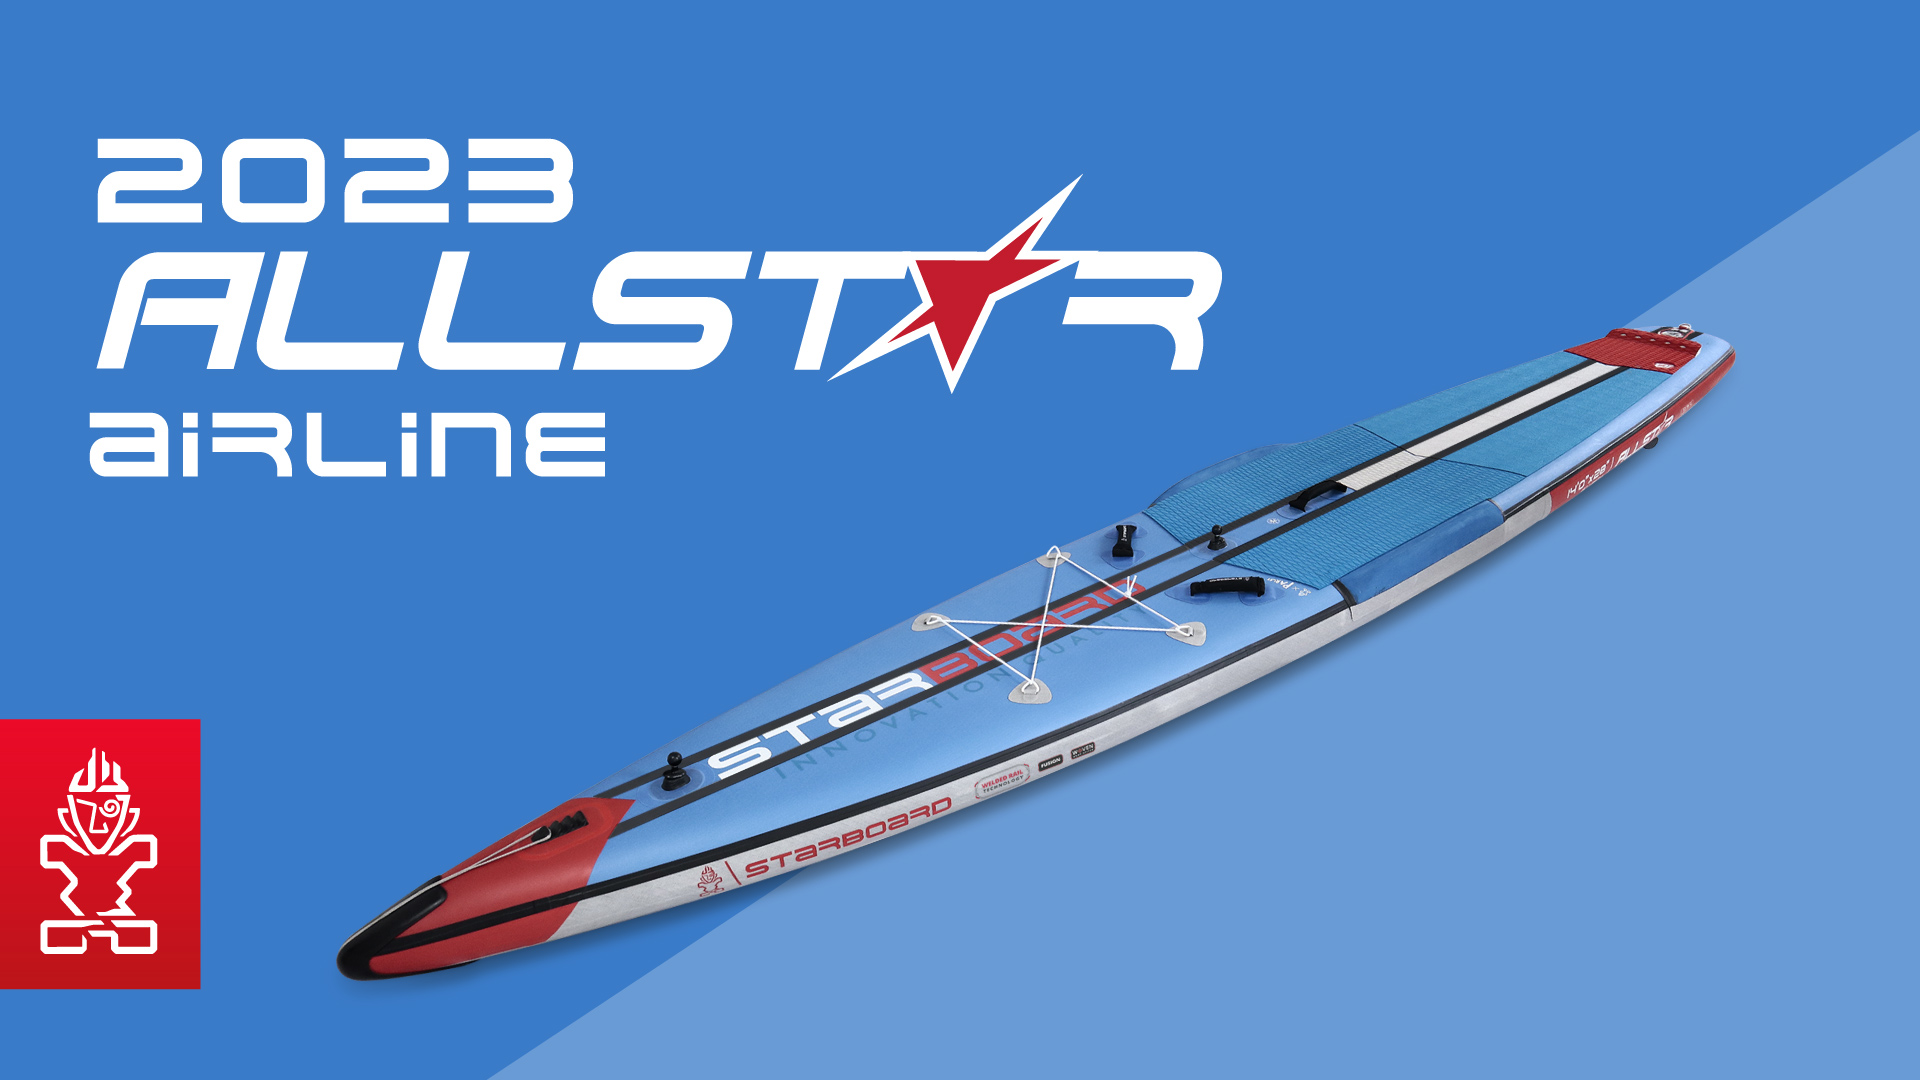 2023 All Star Airline - Starboard SUP